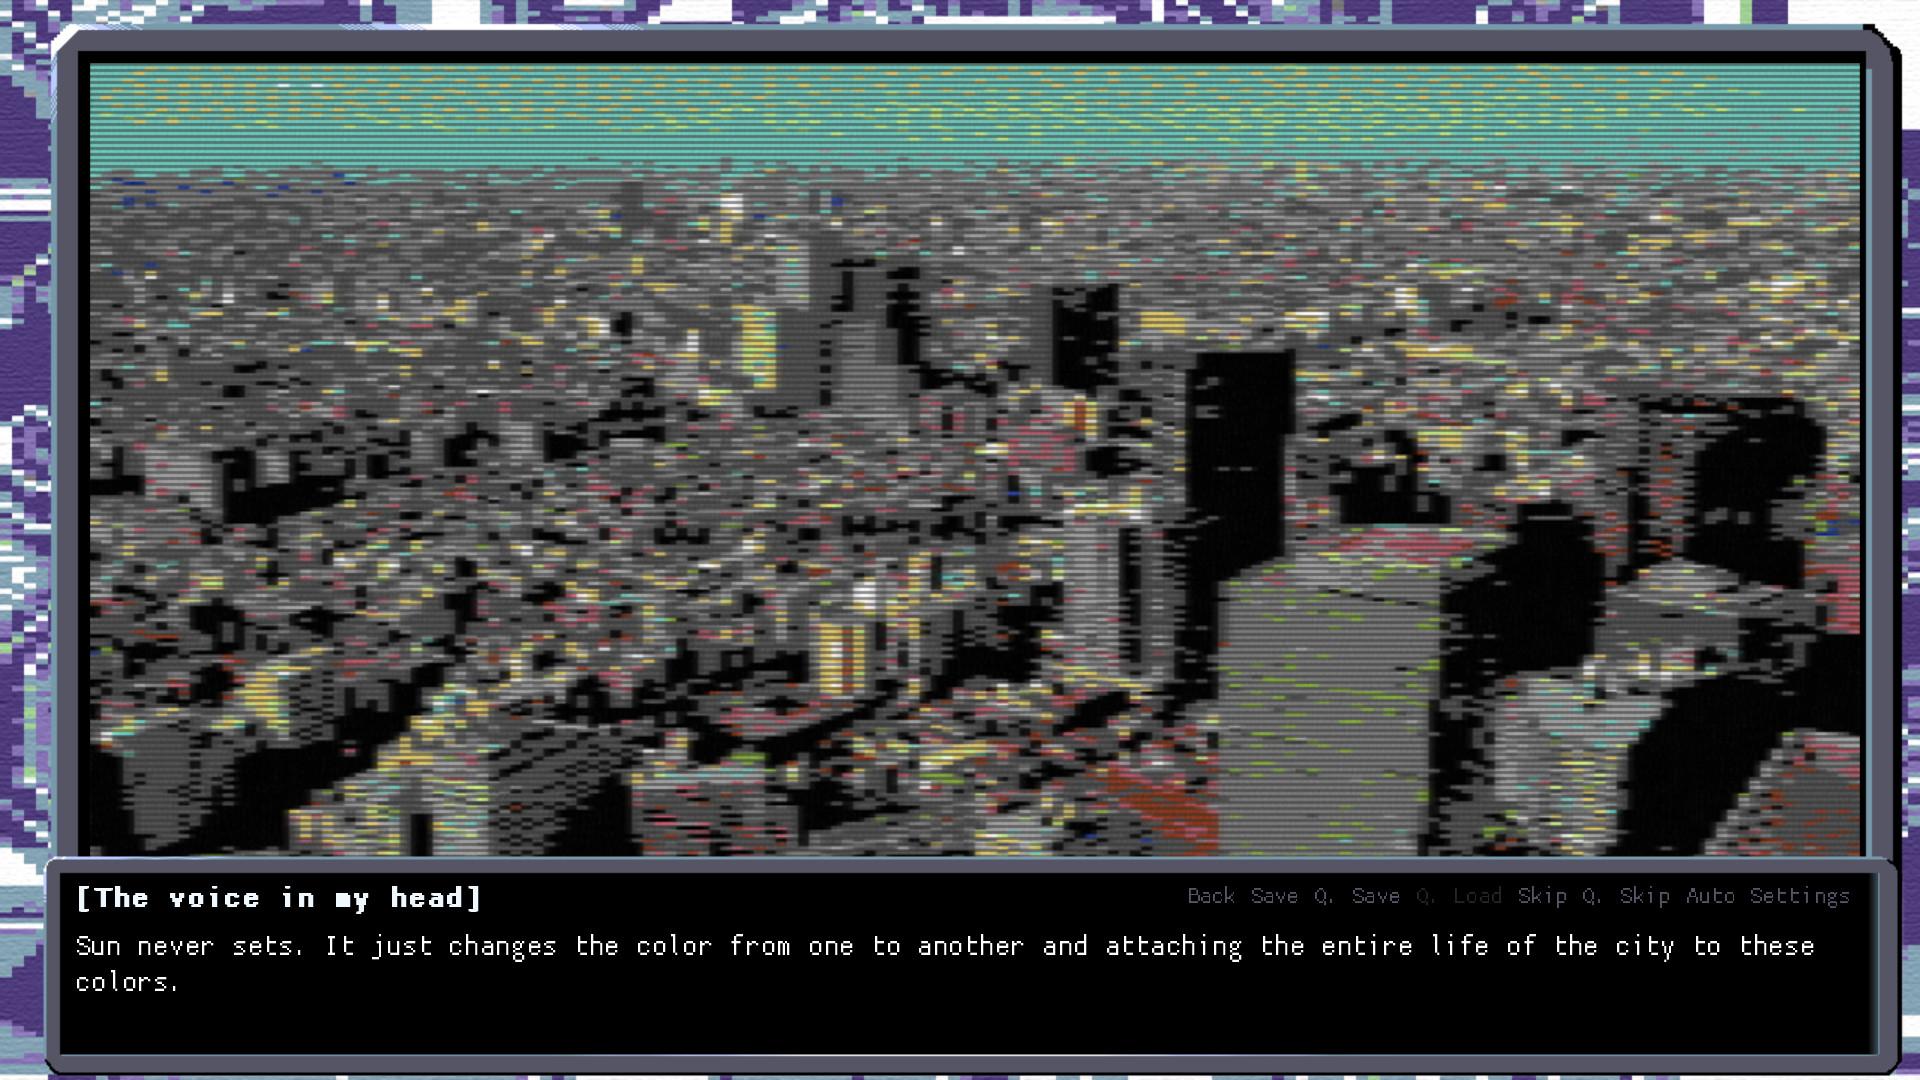 Screenshot №2 from game Cyber City 2157: The Visual Novel